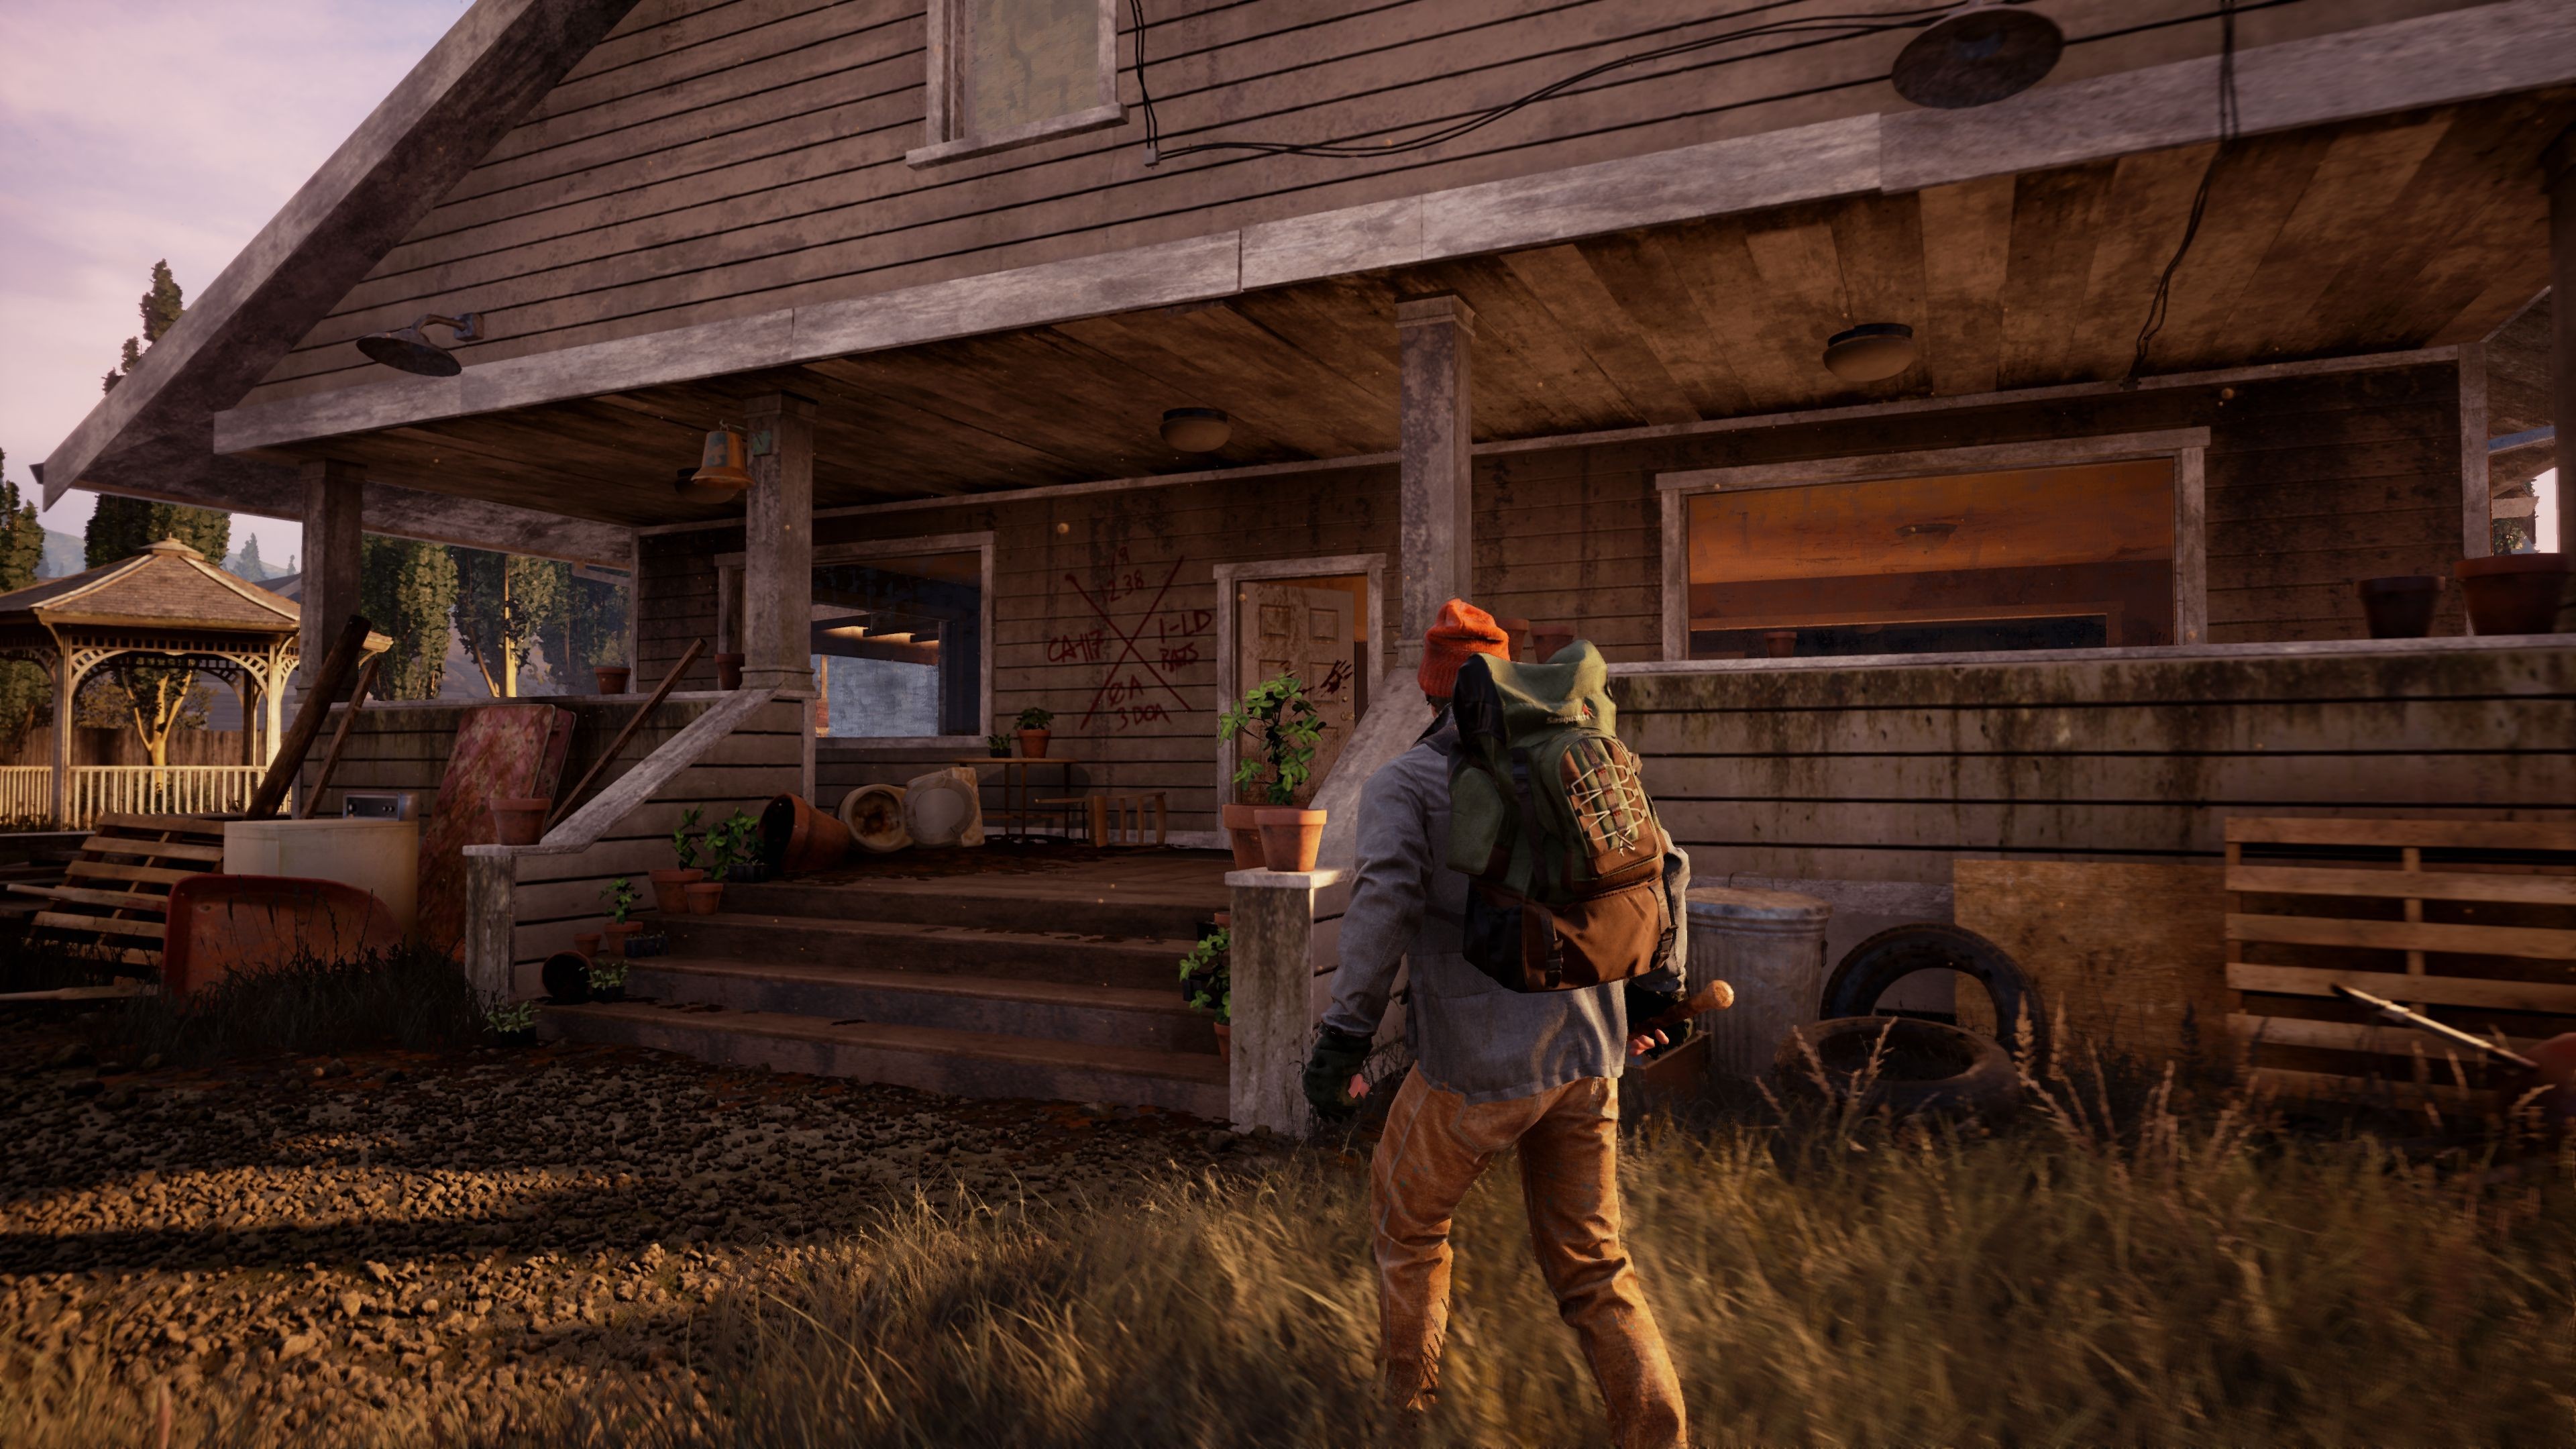 State of Decay 2 Gameplay Trailer Discusses The Secret of Survival